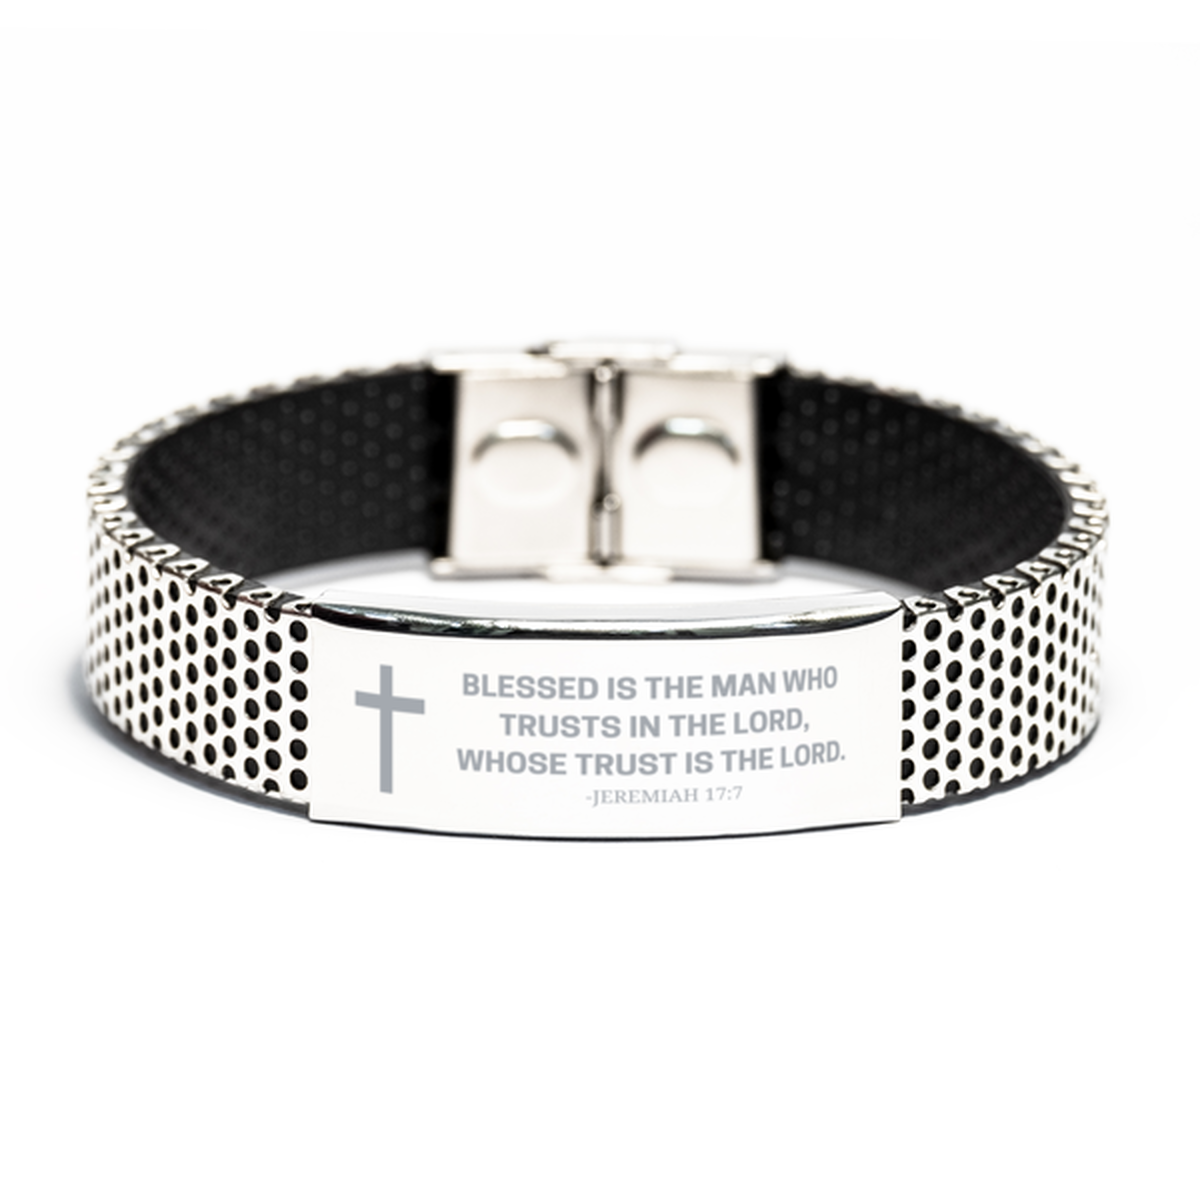 Baptism Gifts For Teenage Boys Girls, Christian Bible Verse Stainless Steel Bracelet, Blessed is the man who trusts, Catholic Confirmation Gifts for Son, Godson, Grandson, Nephew